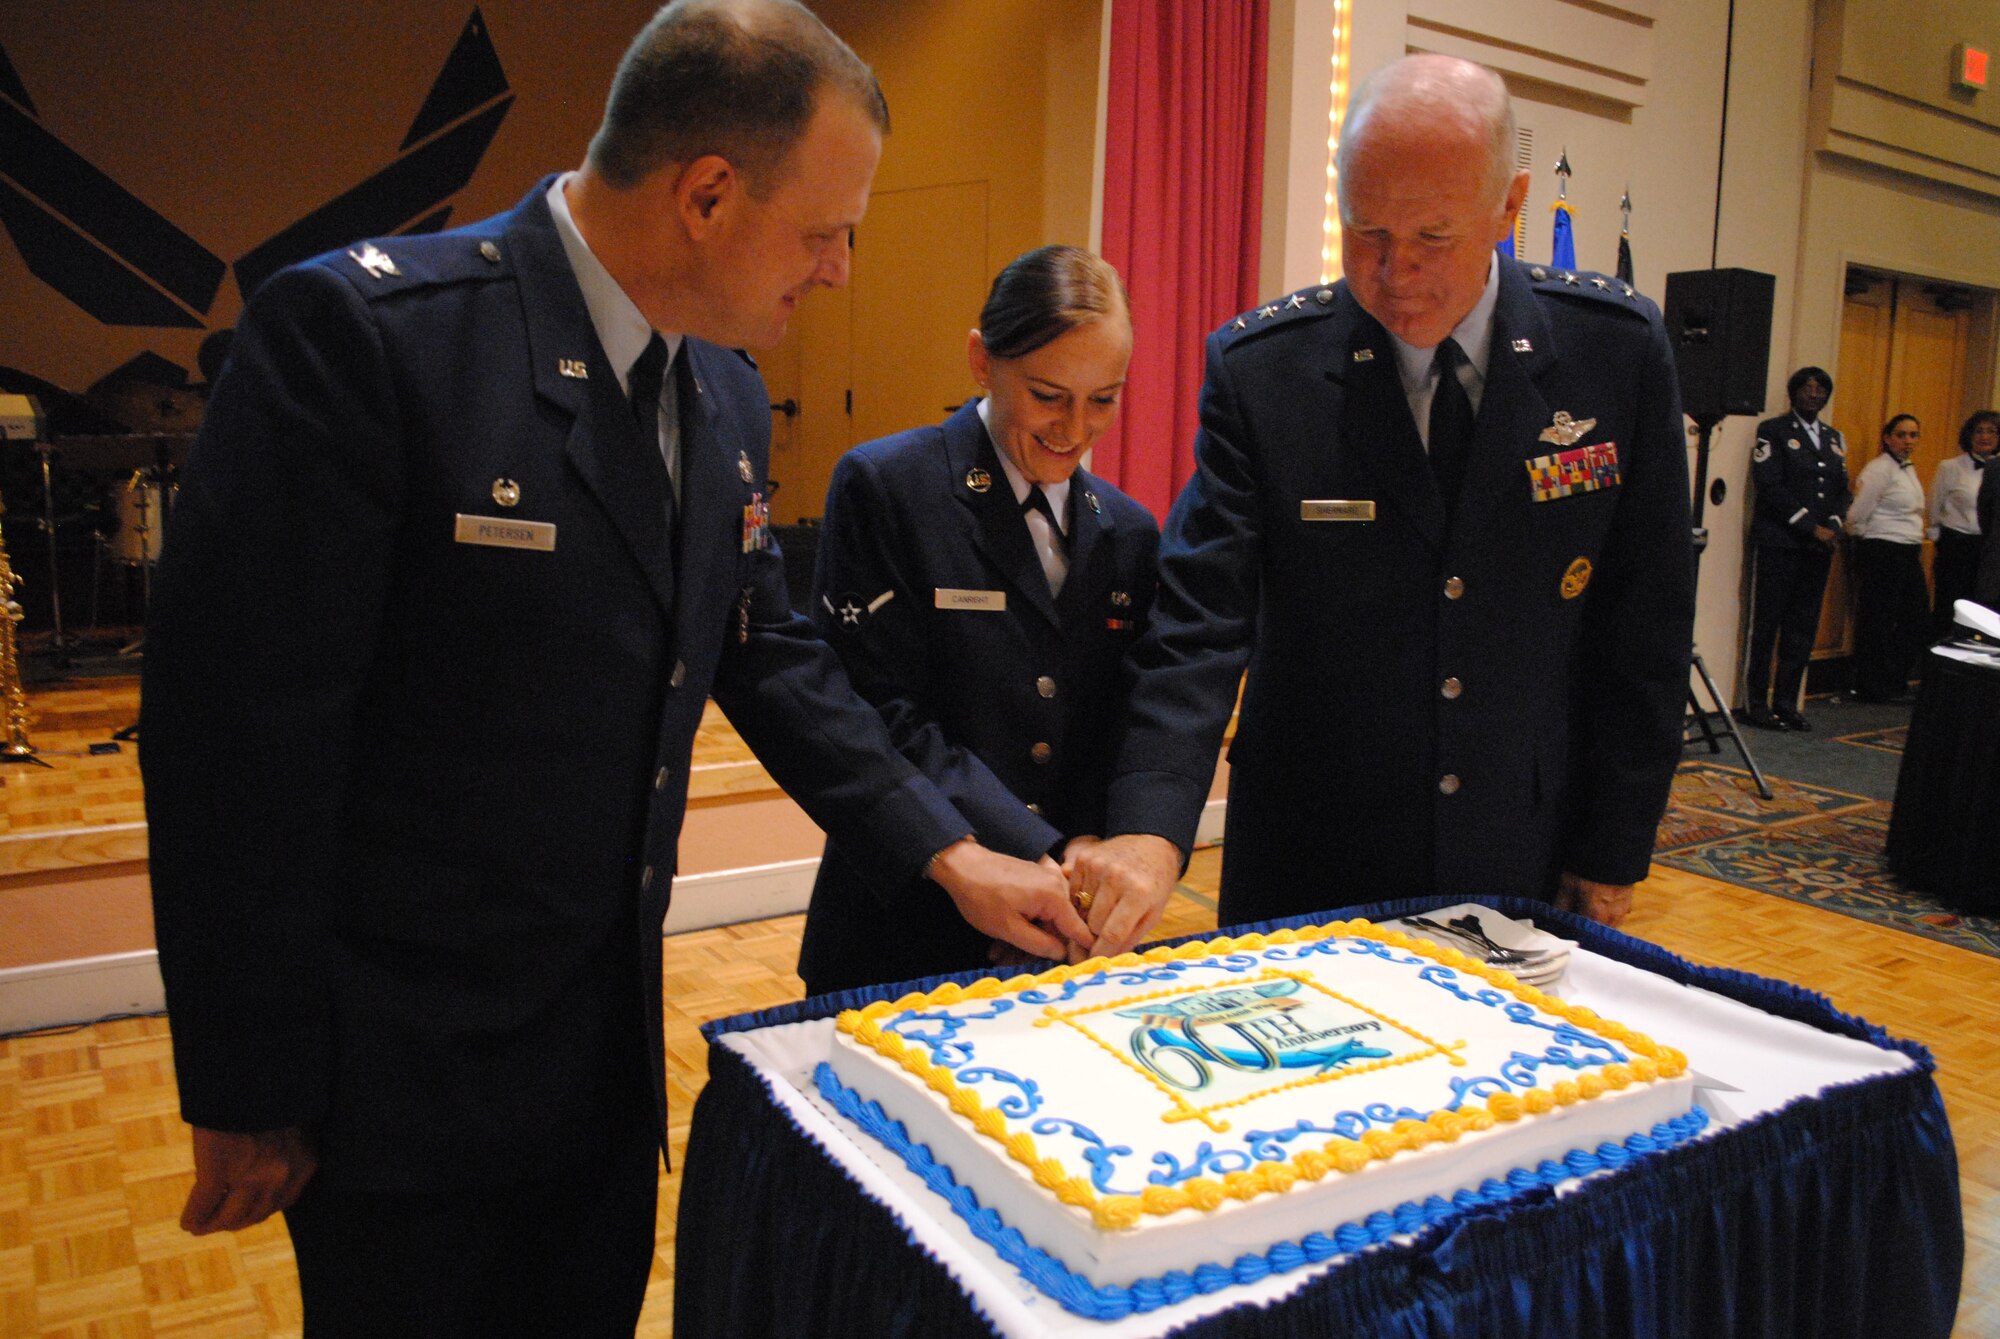 The Alamo Wing celebratory dinner comes to a close as Airman Crystal Canright, the most junior enlisted service member attending the dinner, joined Col. Craig Petersen, 433rd Mission Support Group commander and retired Lt. Gen. James E. Sherrard III, for the official cutting of the 433rd Airlift Wing 60th Anniversary cake. Gen. Sherrard was the official guest speaker at the dinner which took place Sept. 10, 2011, at the Gateway Club at Lackland Air Force Base, Texas, and Col. Petersen was the official host. (U.S. Air Force photo/Senior Airman Luis Loza Gutierrez)